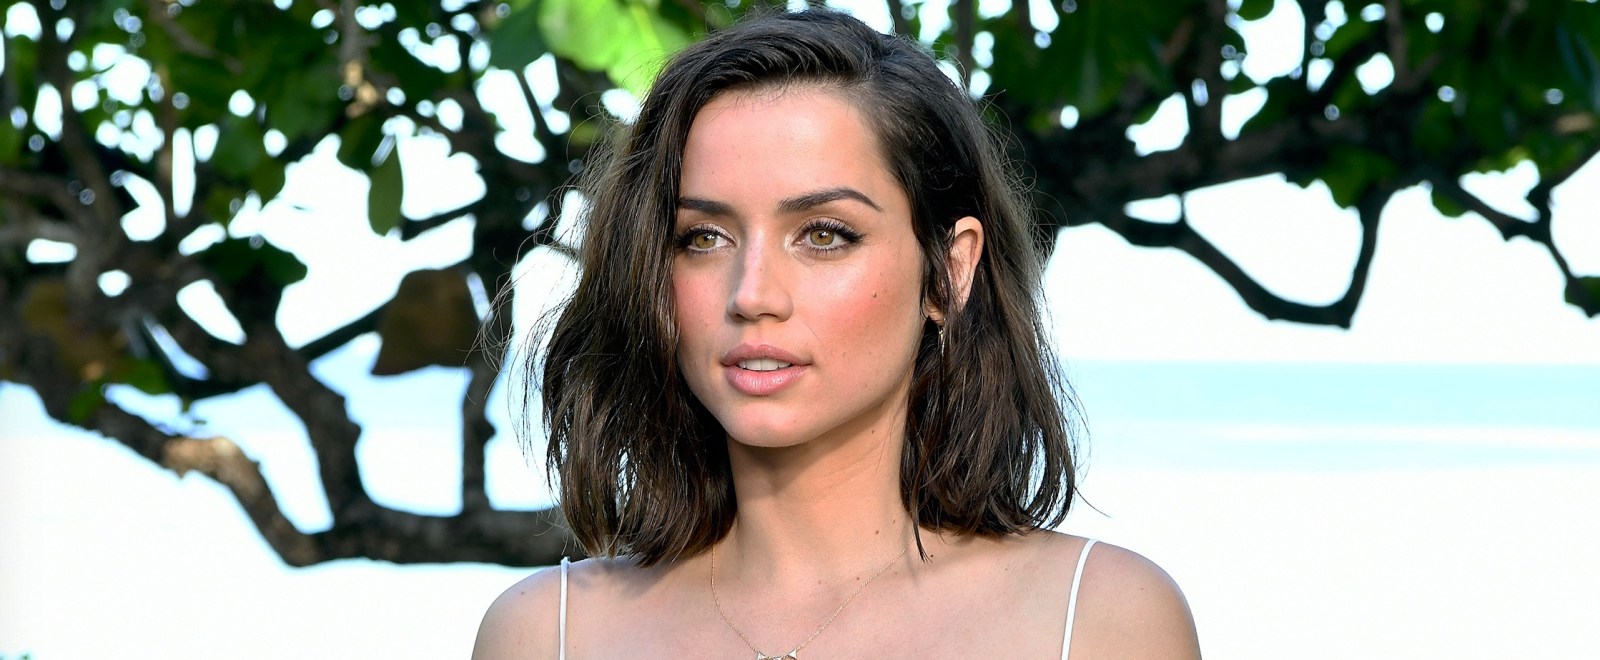 Ana de Armas Doesn't Understand Why 'Blonde' Is Rated NC-17